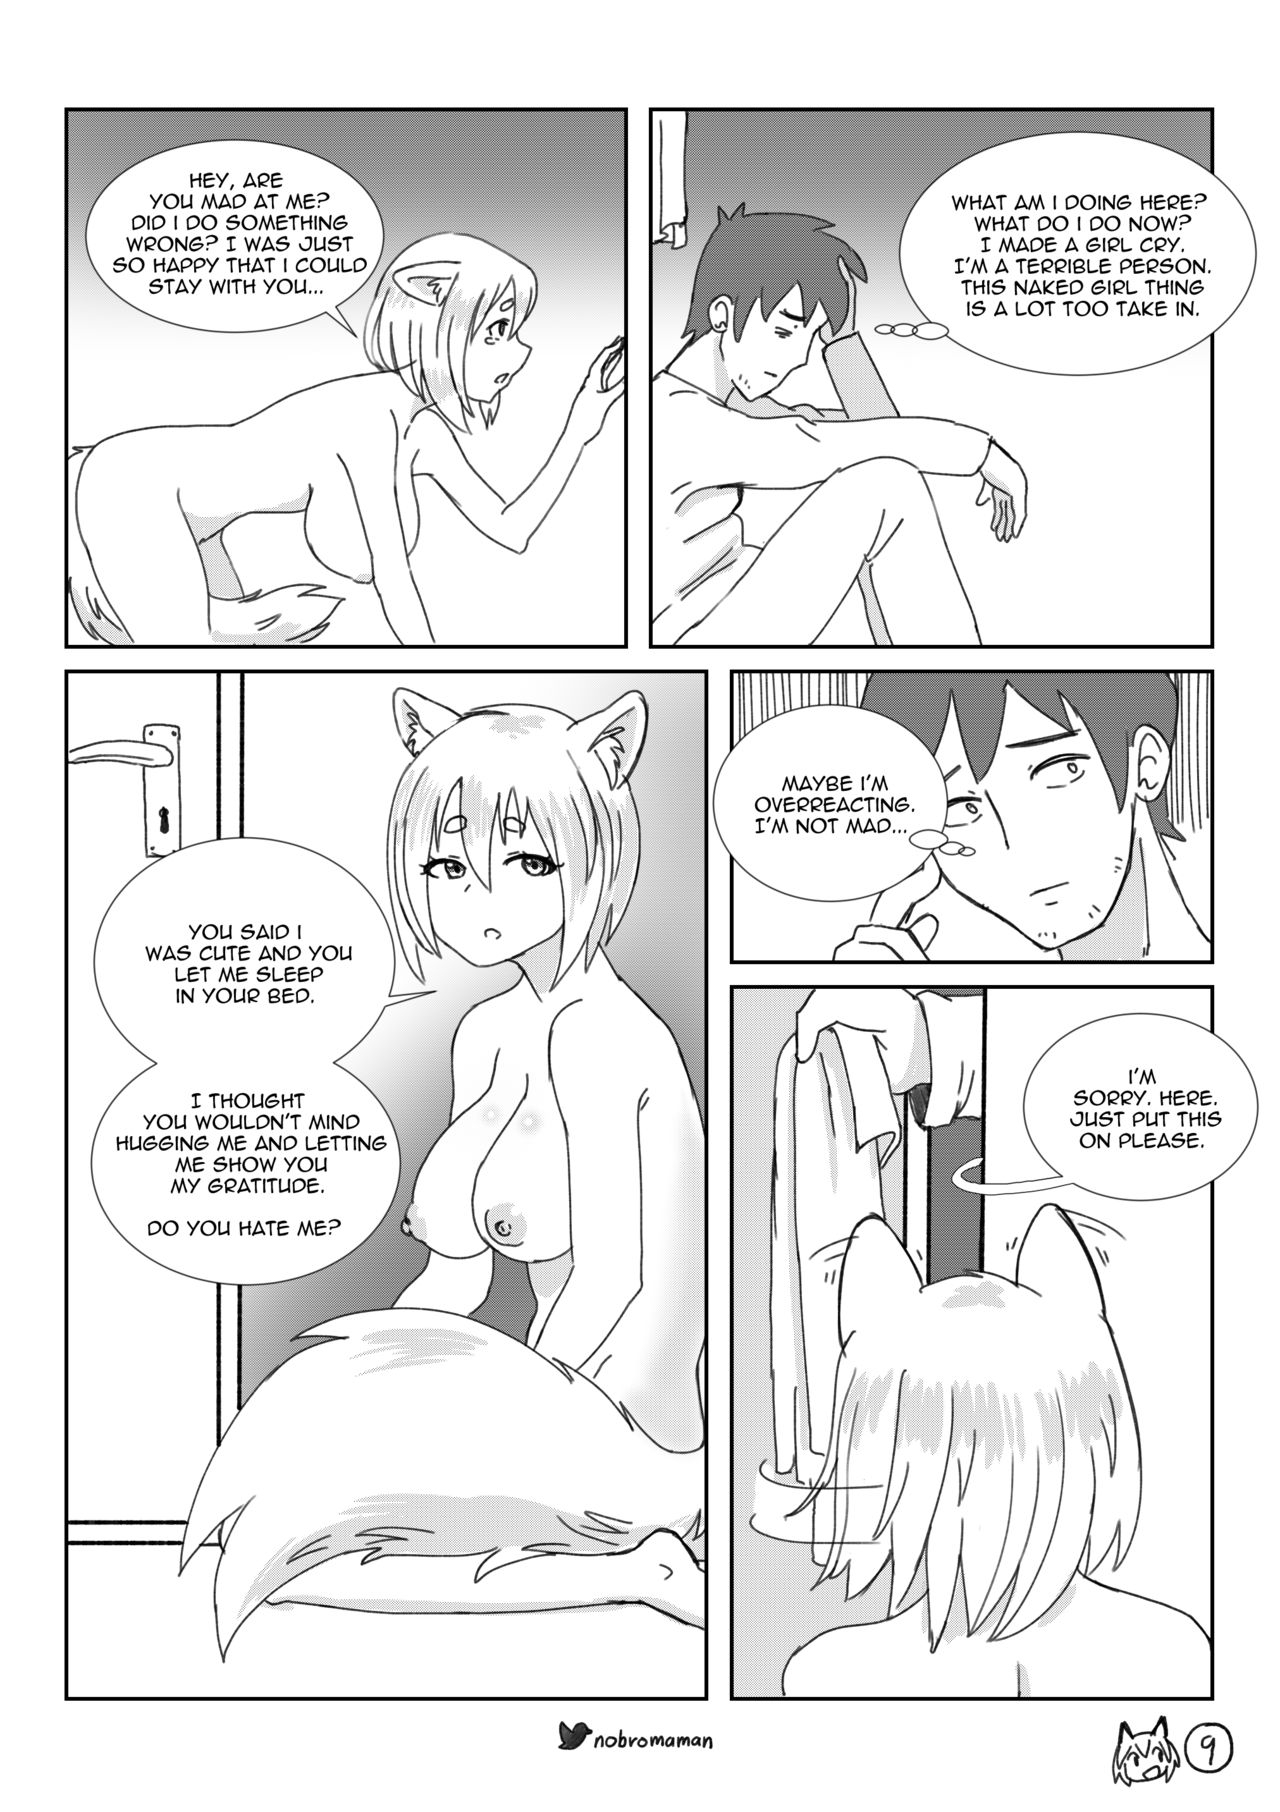 Life with a dog girl - Chapter1 (ongoing) 9